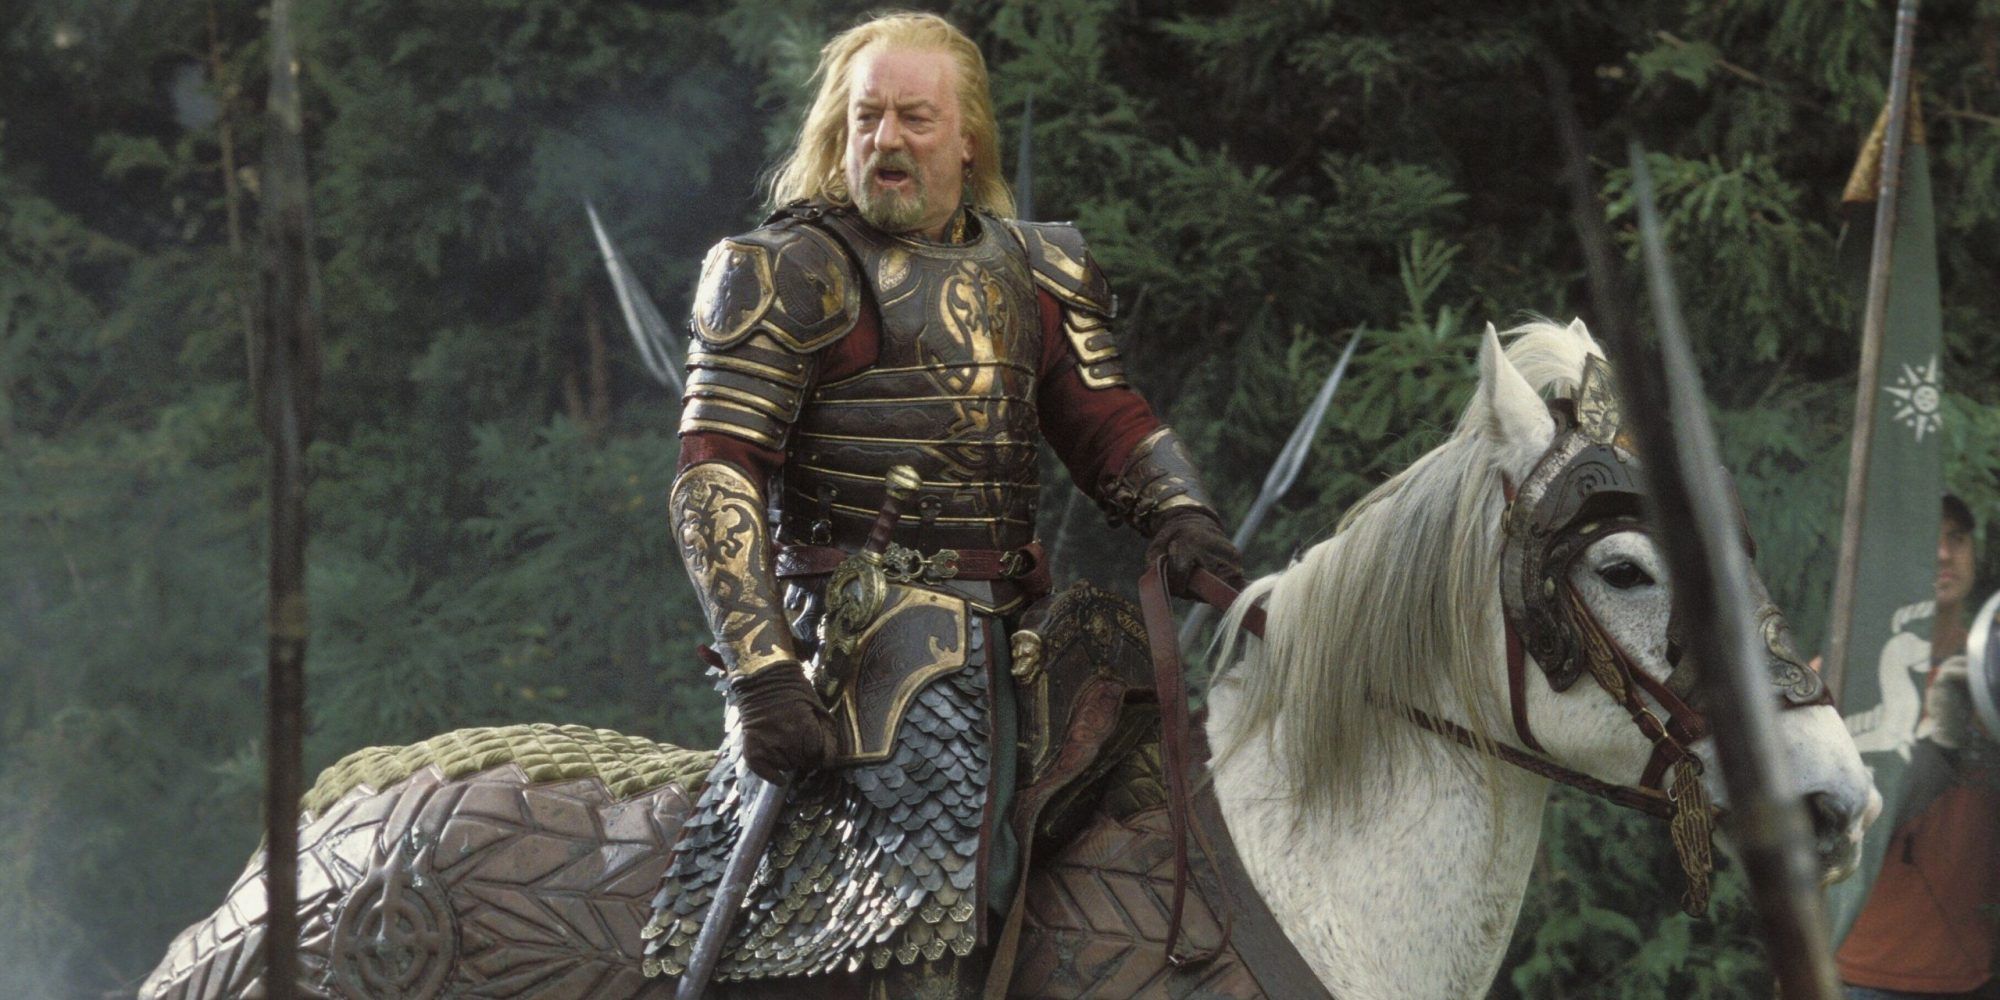 King Theoden riding his horse into battle